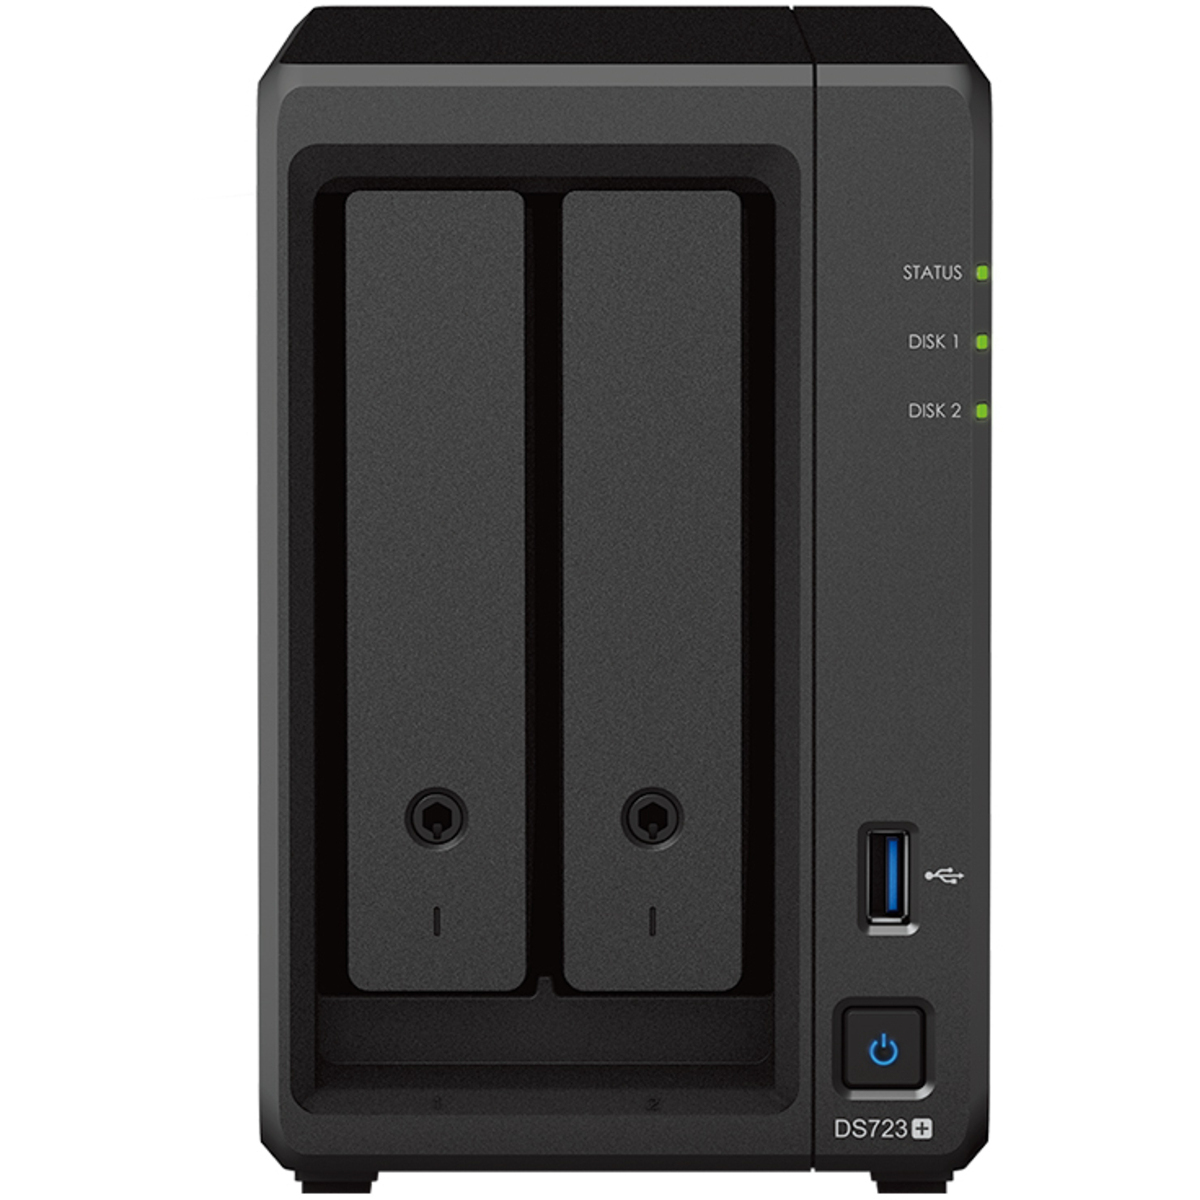 Synology DiskStation DS723+ 16tb 2-Bay Desktop Multimedia / Power User / Business NAS - Network Attached Storage Device 2x8tb Western Digital Ultrastar DC HC320 HUS728T8TALE6L4 3.5 7200rpm SATA 6Gb/s HDD ENTERPRISE Class Drives Installed - Burn-In Tested DiskStation DS723+